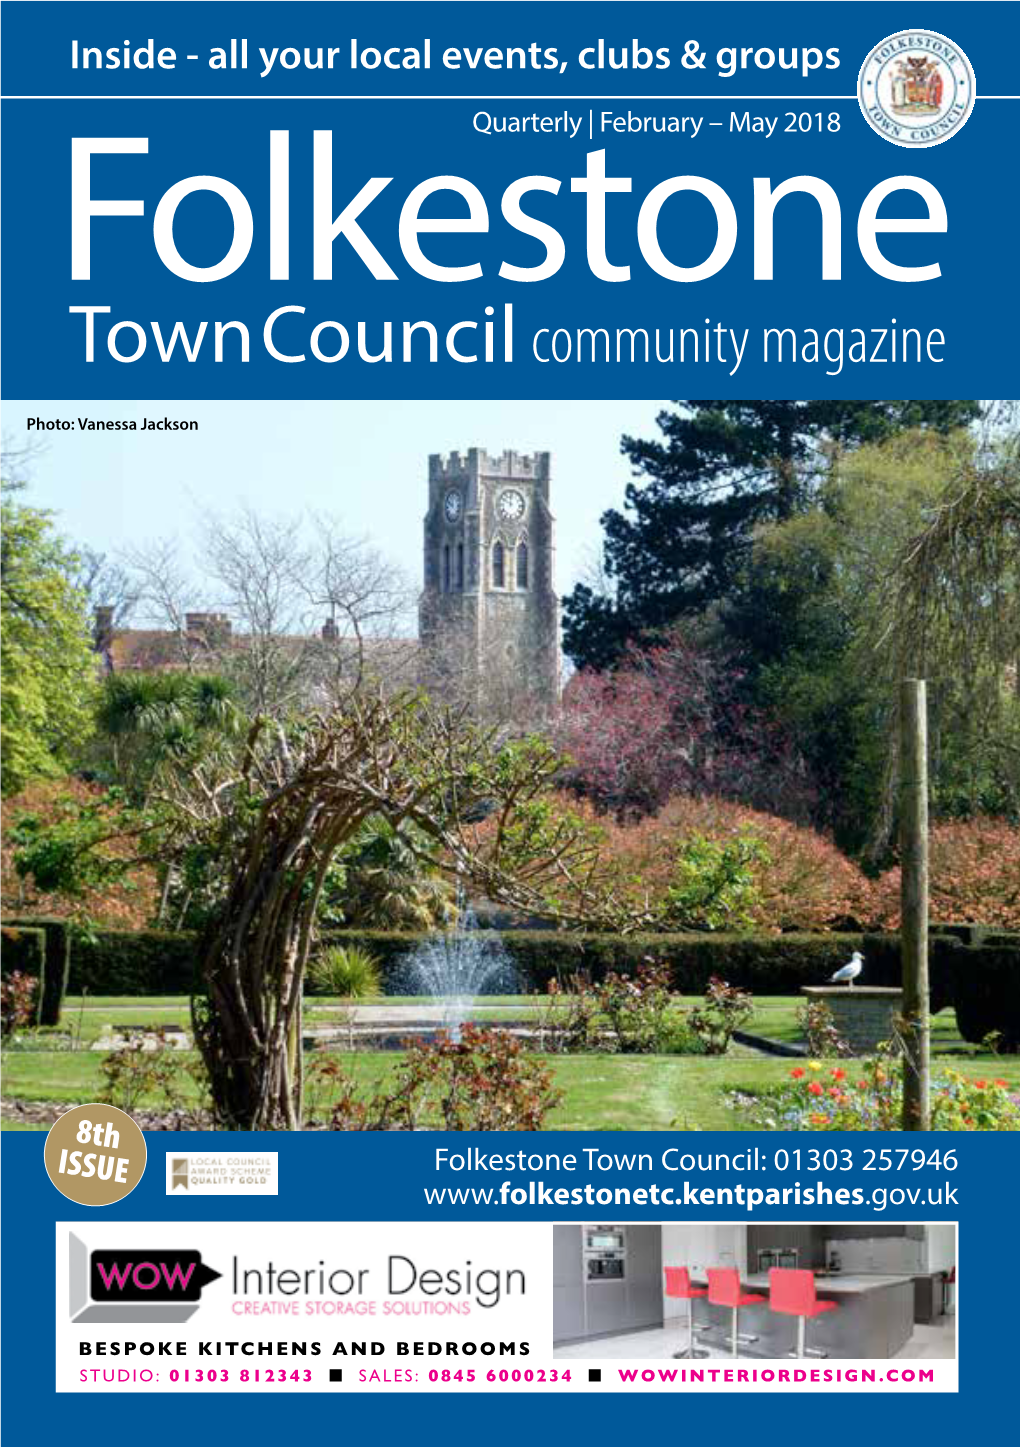 Spring Edition of the Folkestone Town Council Community Magazine